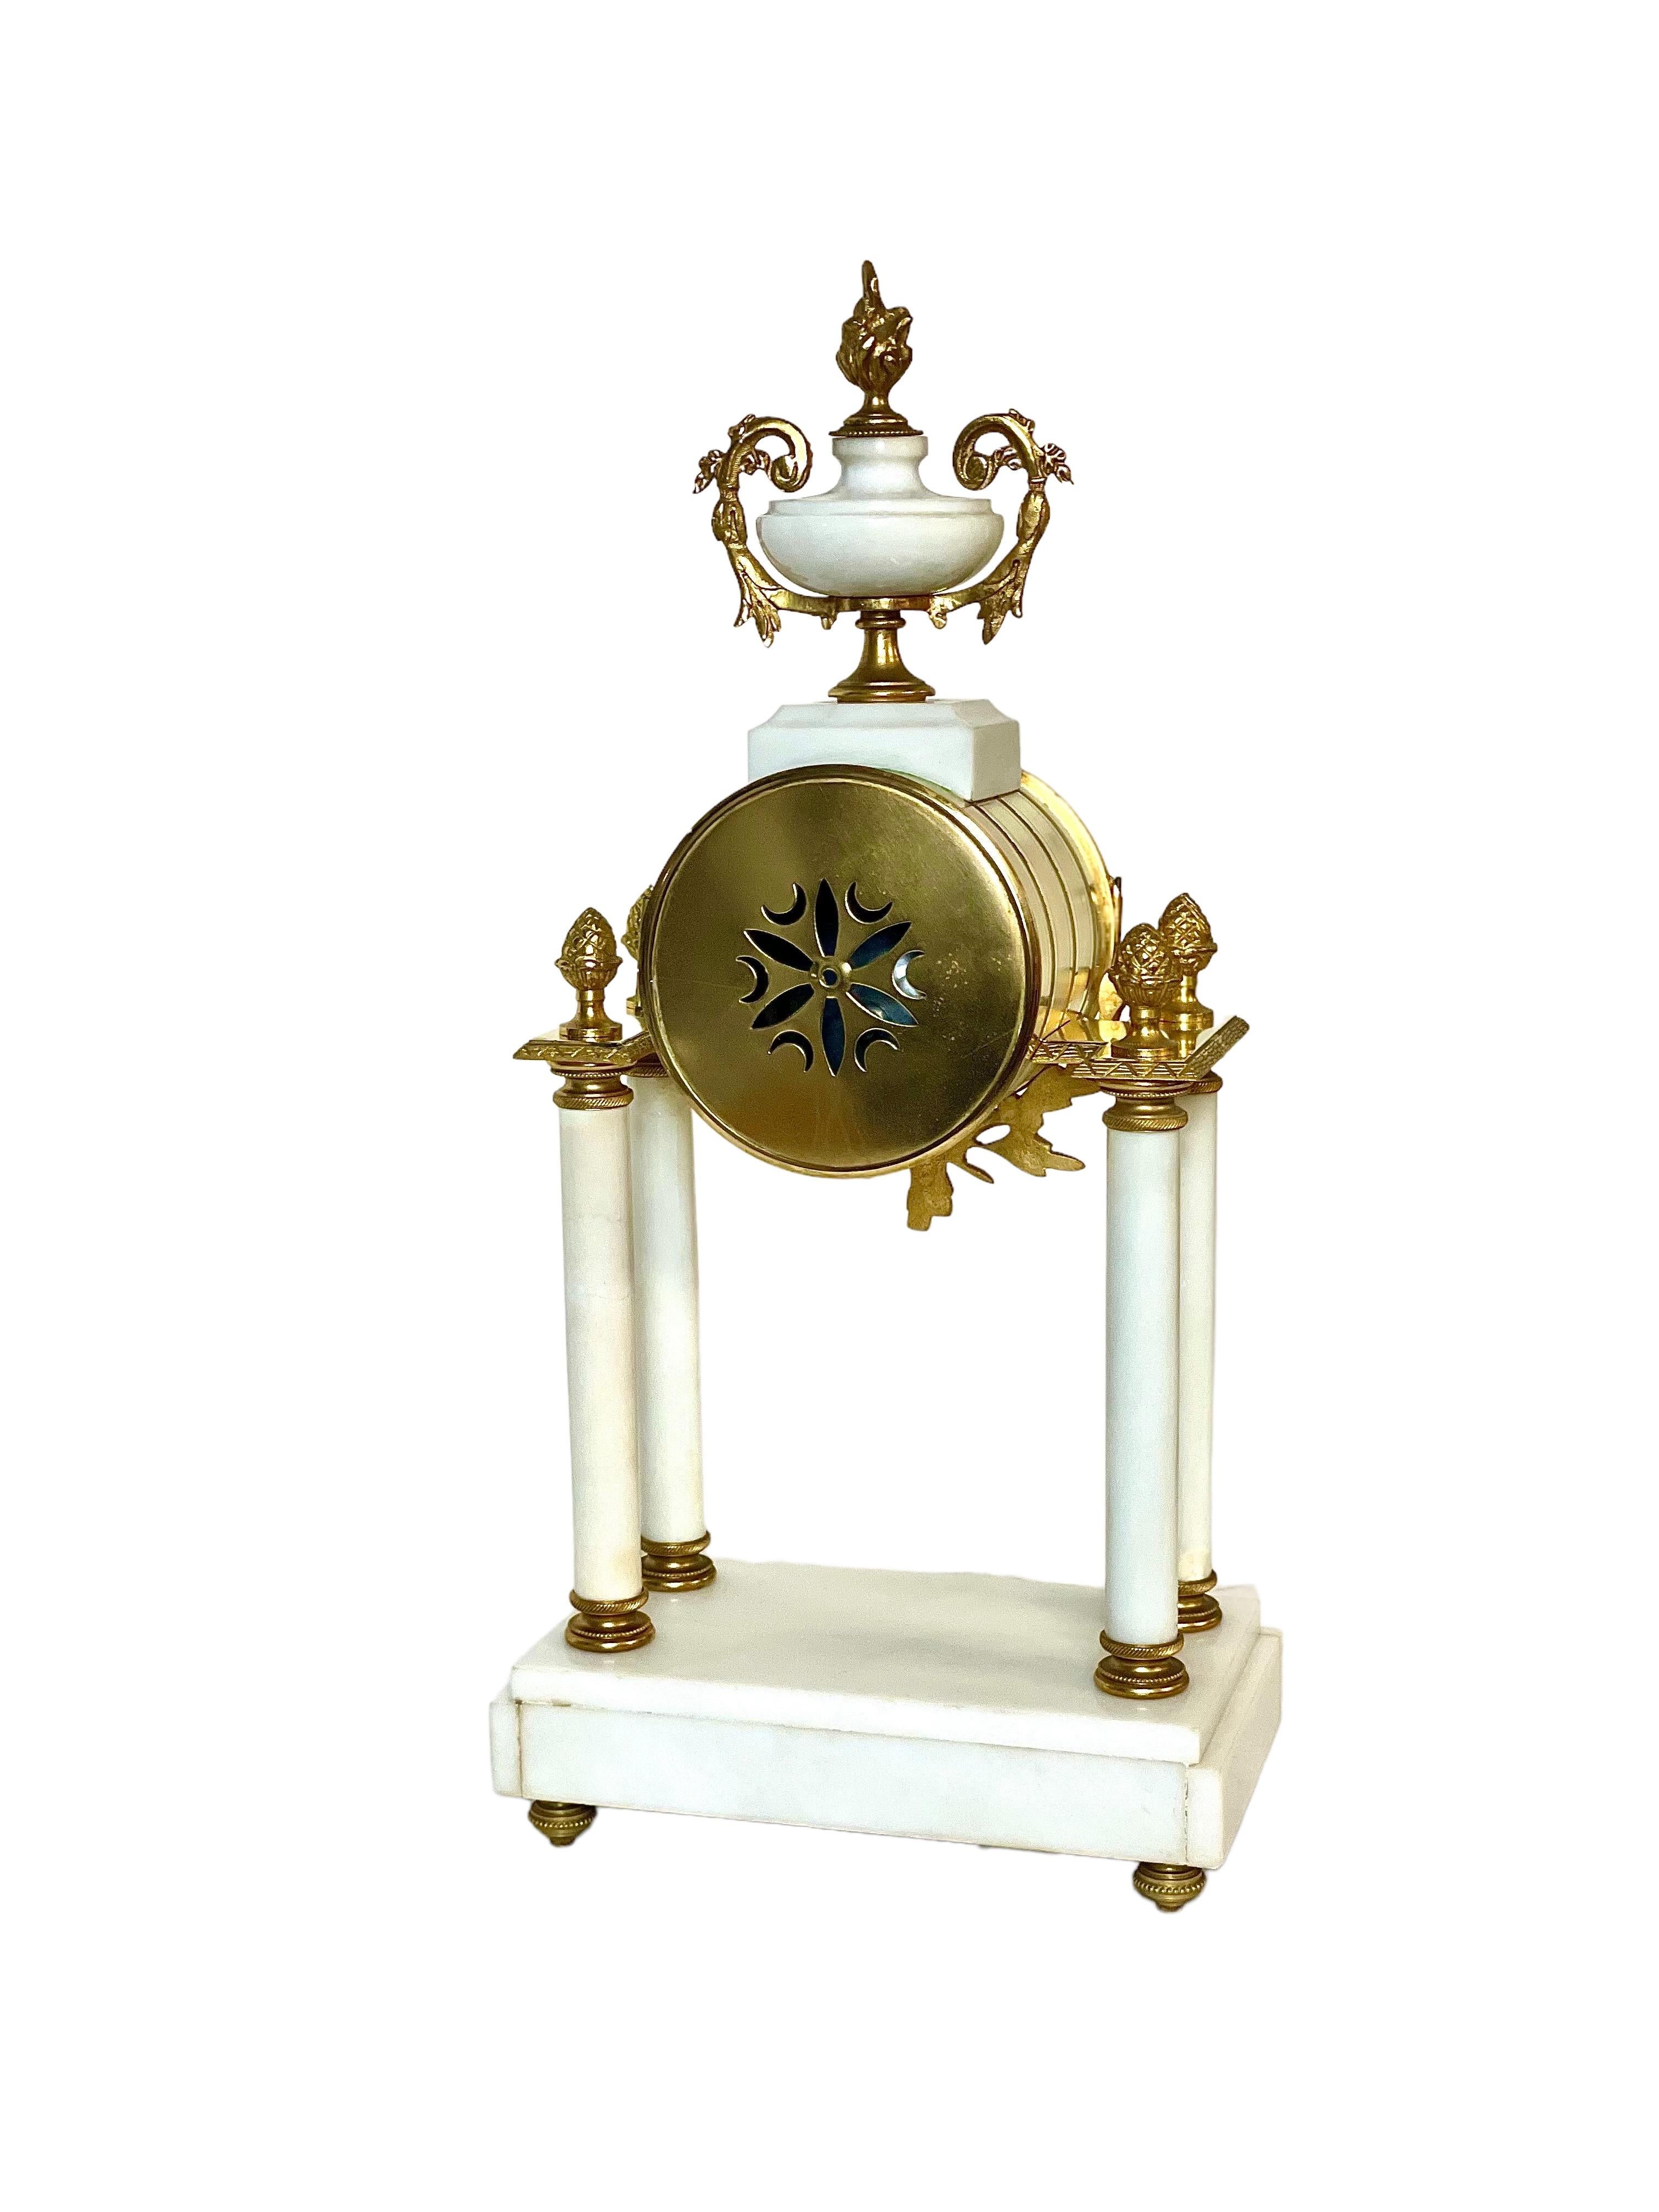 A beautiful and original antique French portico clock, crafted from white marble mounted with ormolu (finely gilded bronze). The face of the clock is daintily painted with floral swags between the numbers on porcelain enamel, and comes complete with